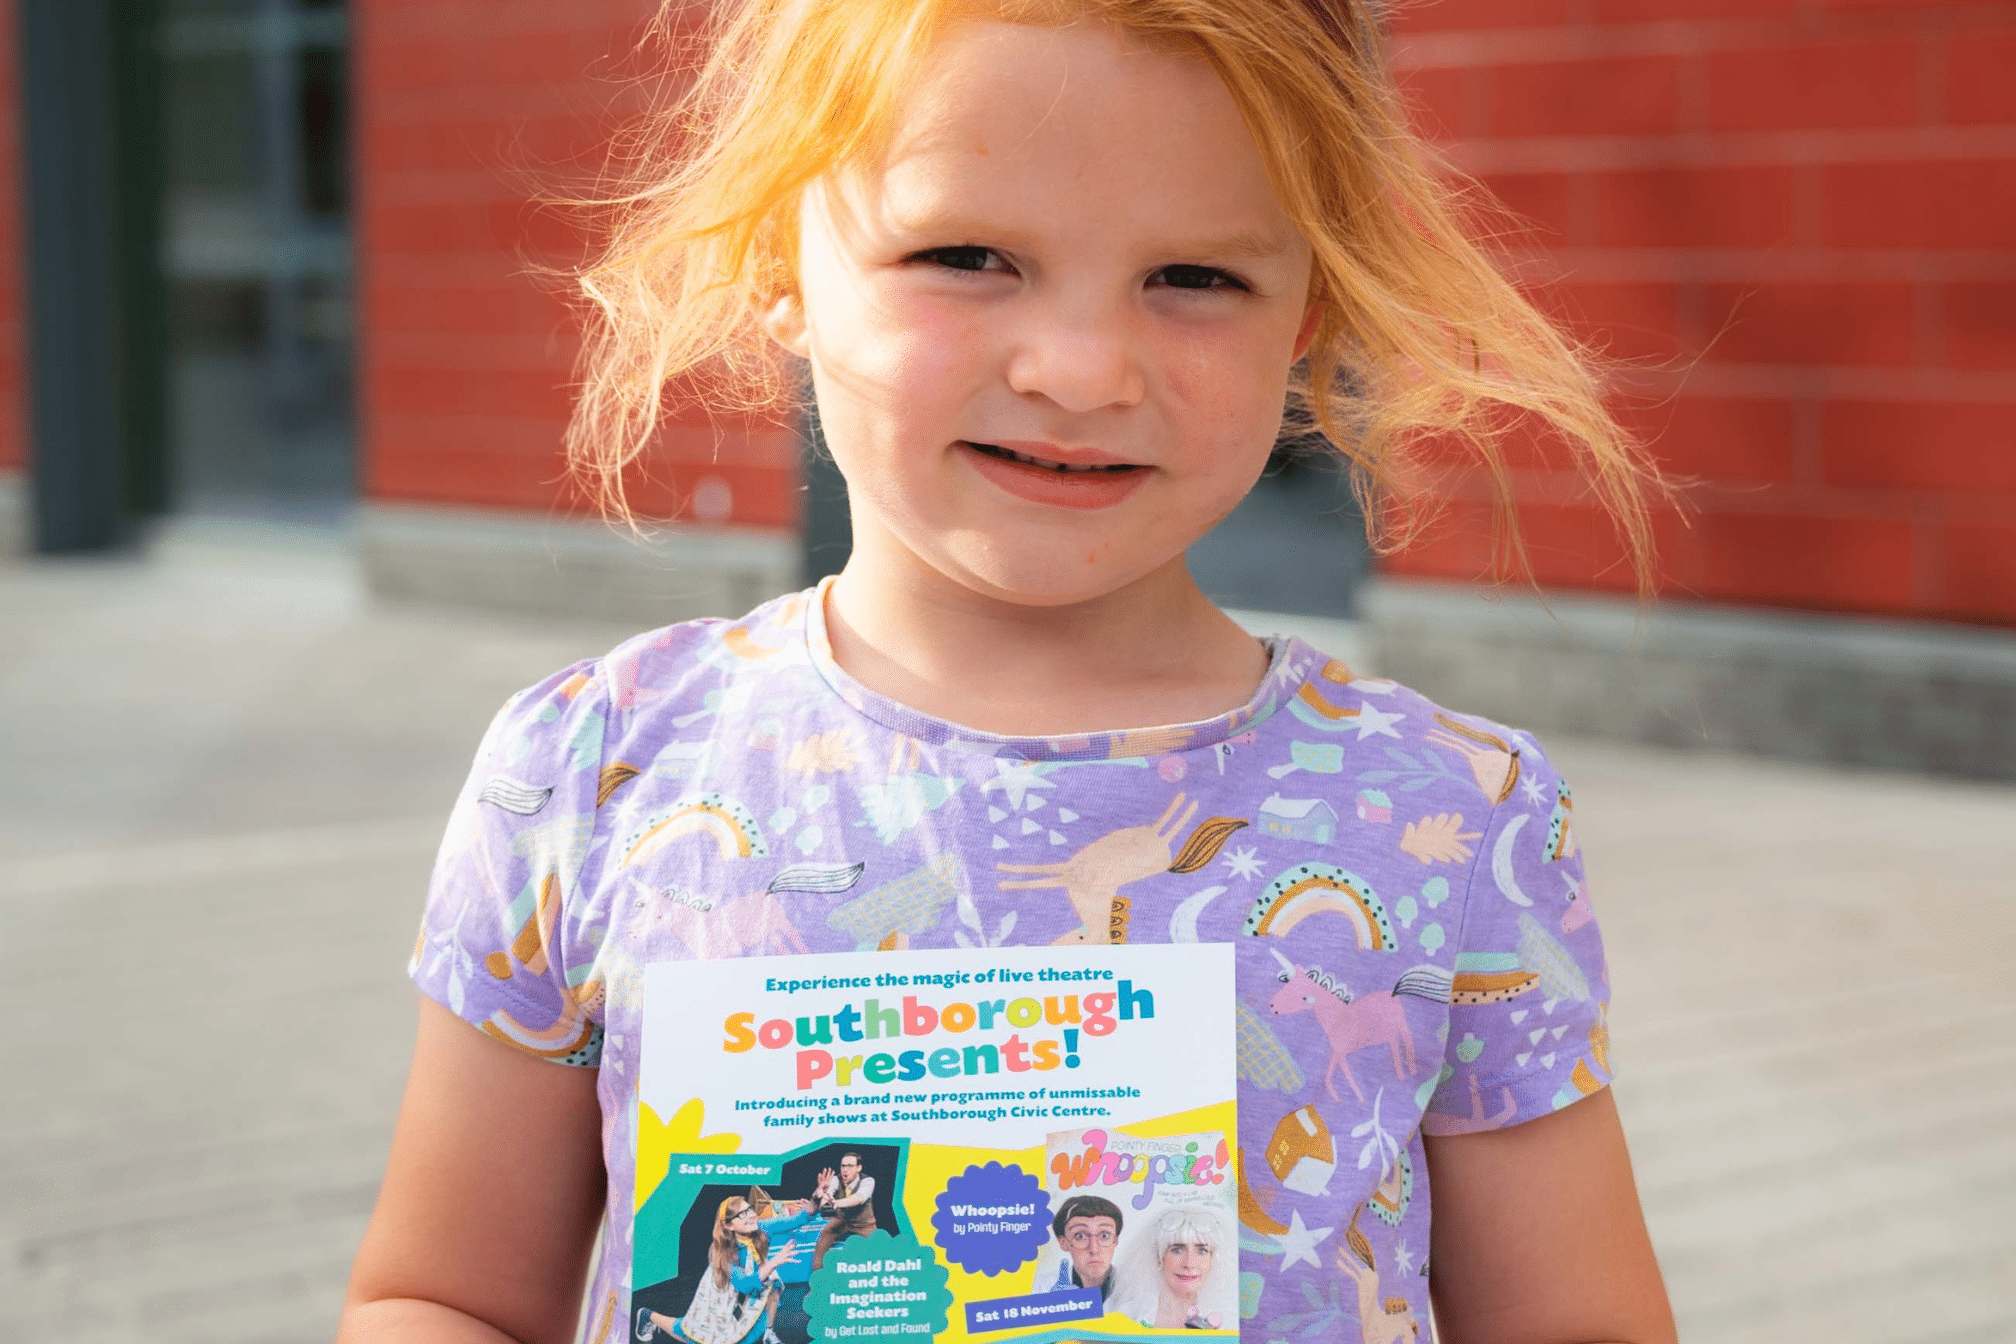 A young girl with red hair is holding a Southborough Presents flyer.